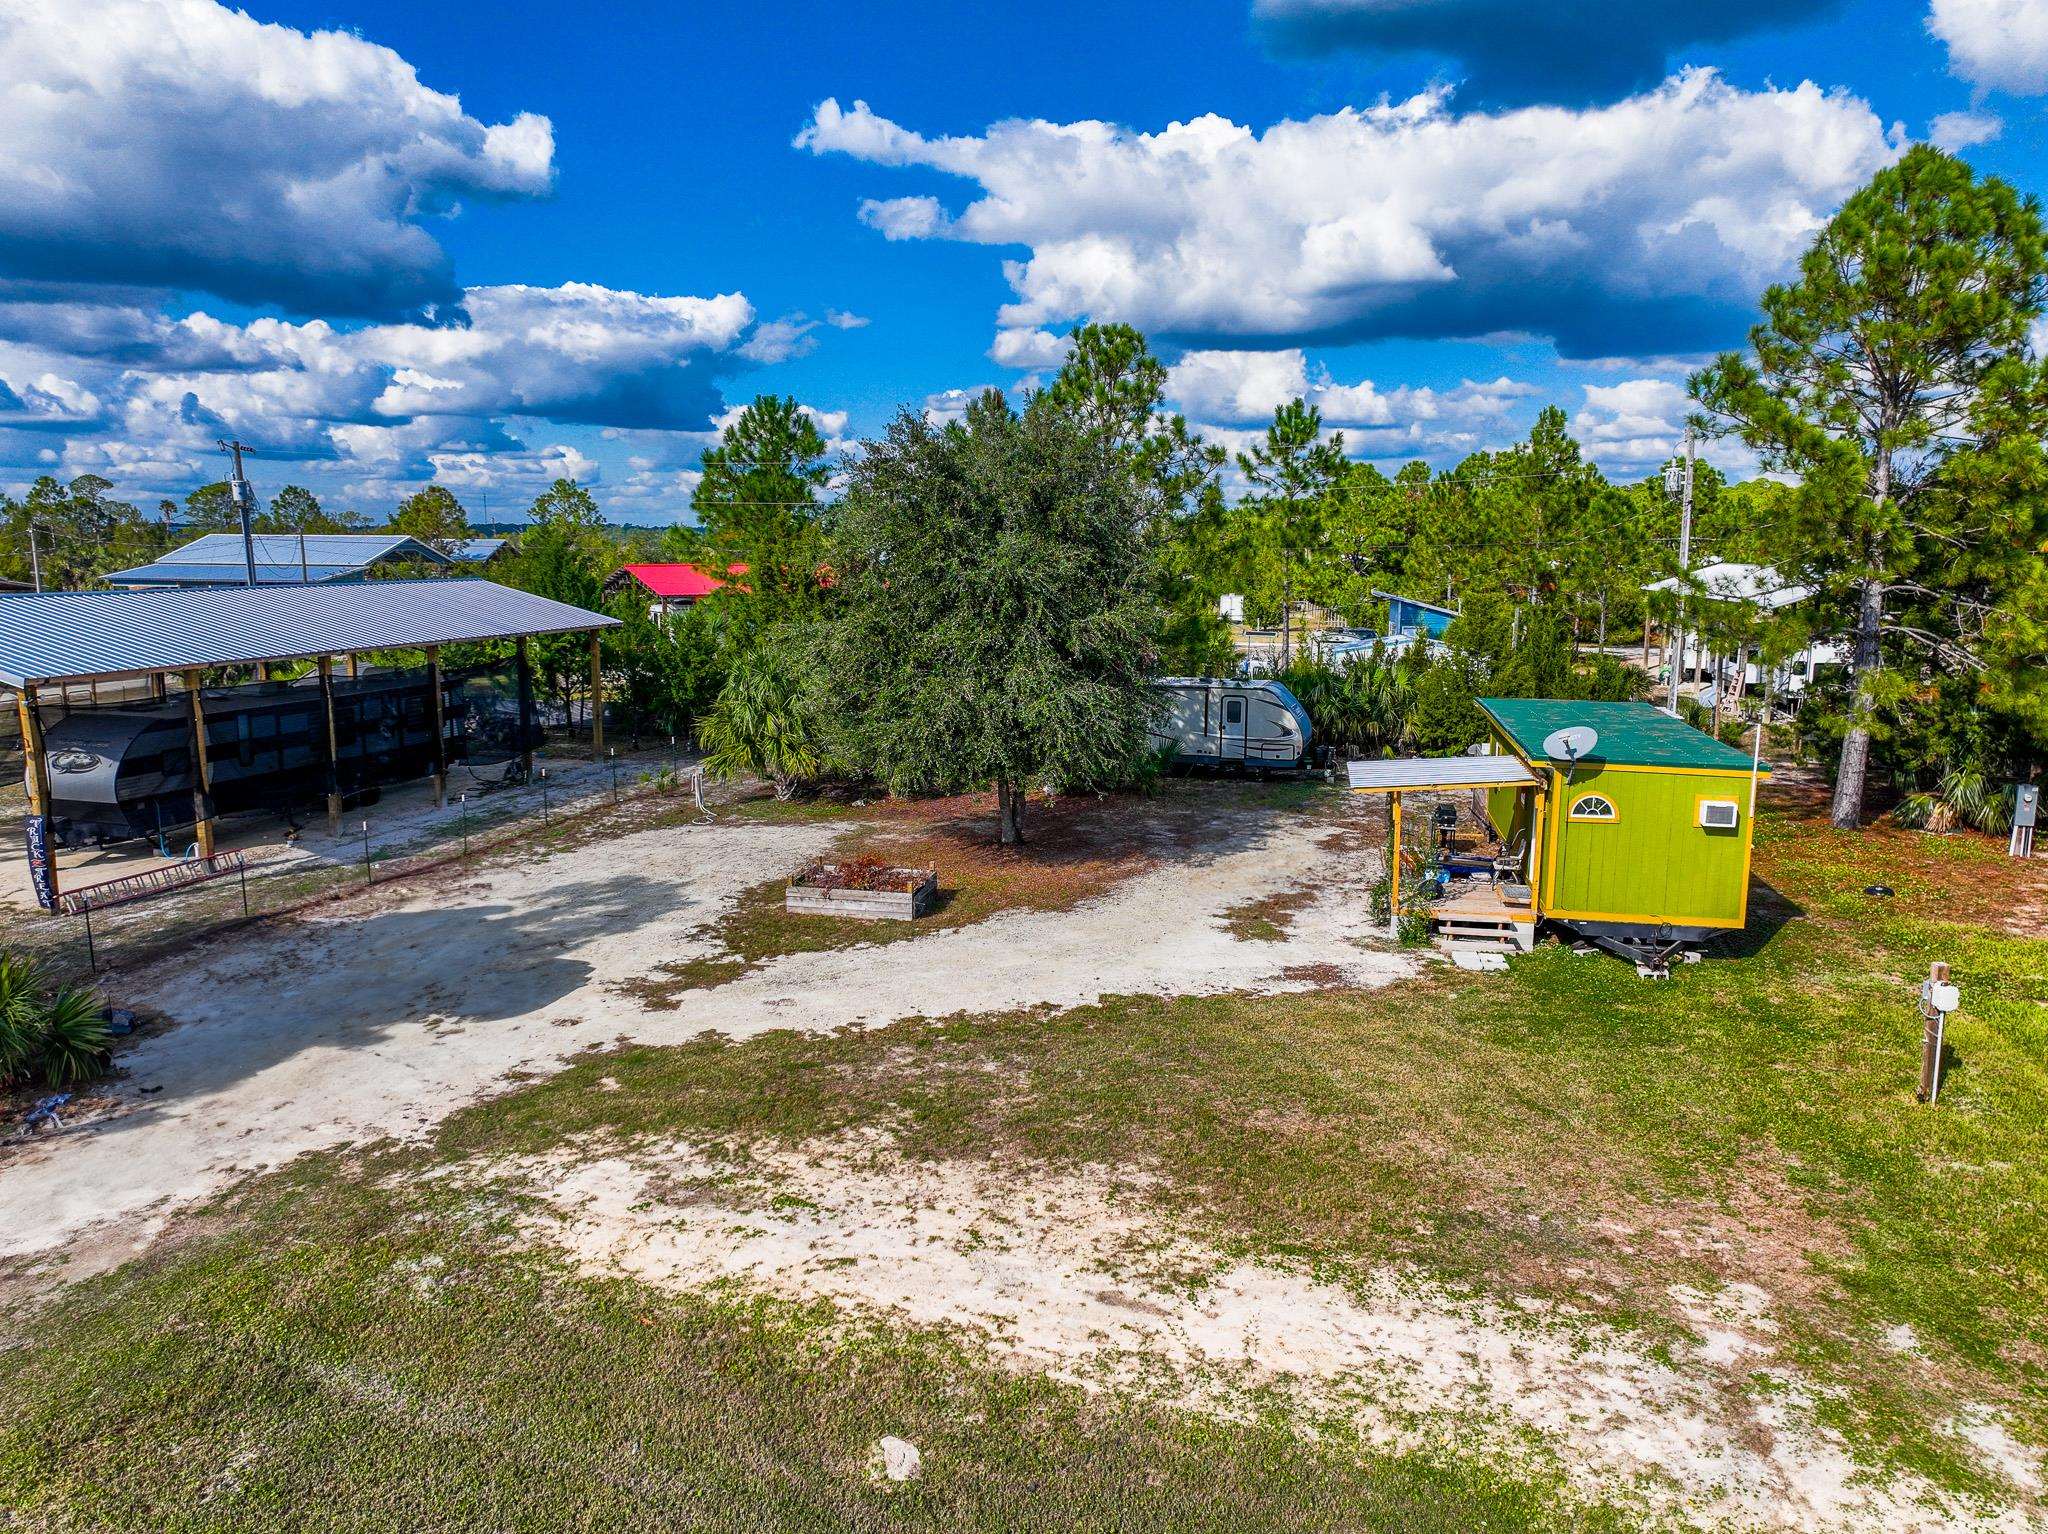 20903 Osprey,PERRY,Florida 32348-6666,Lots and land,Osprey,366184